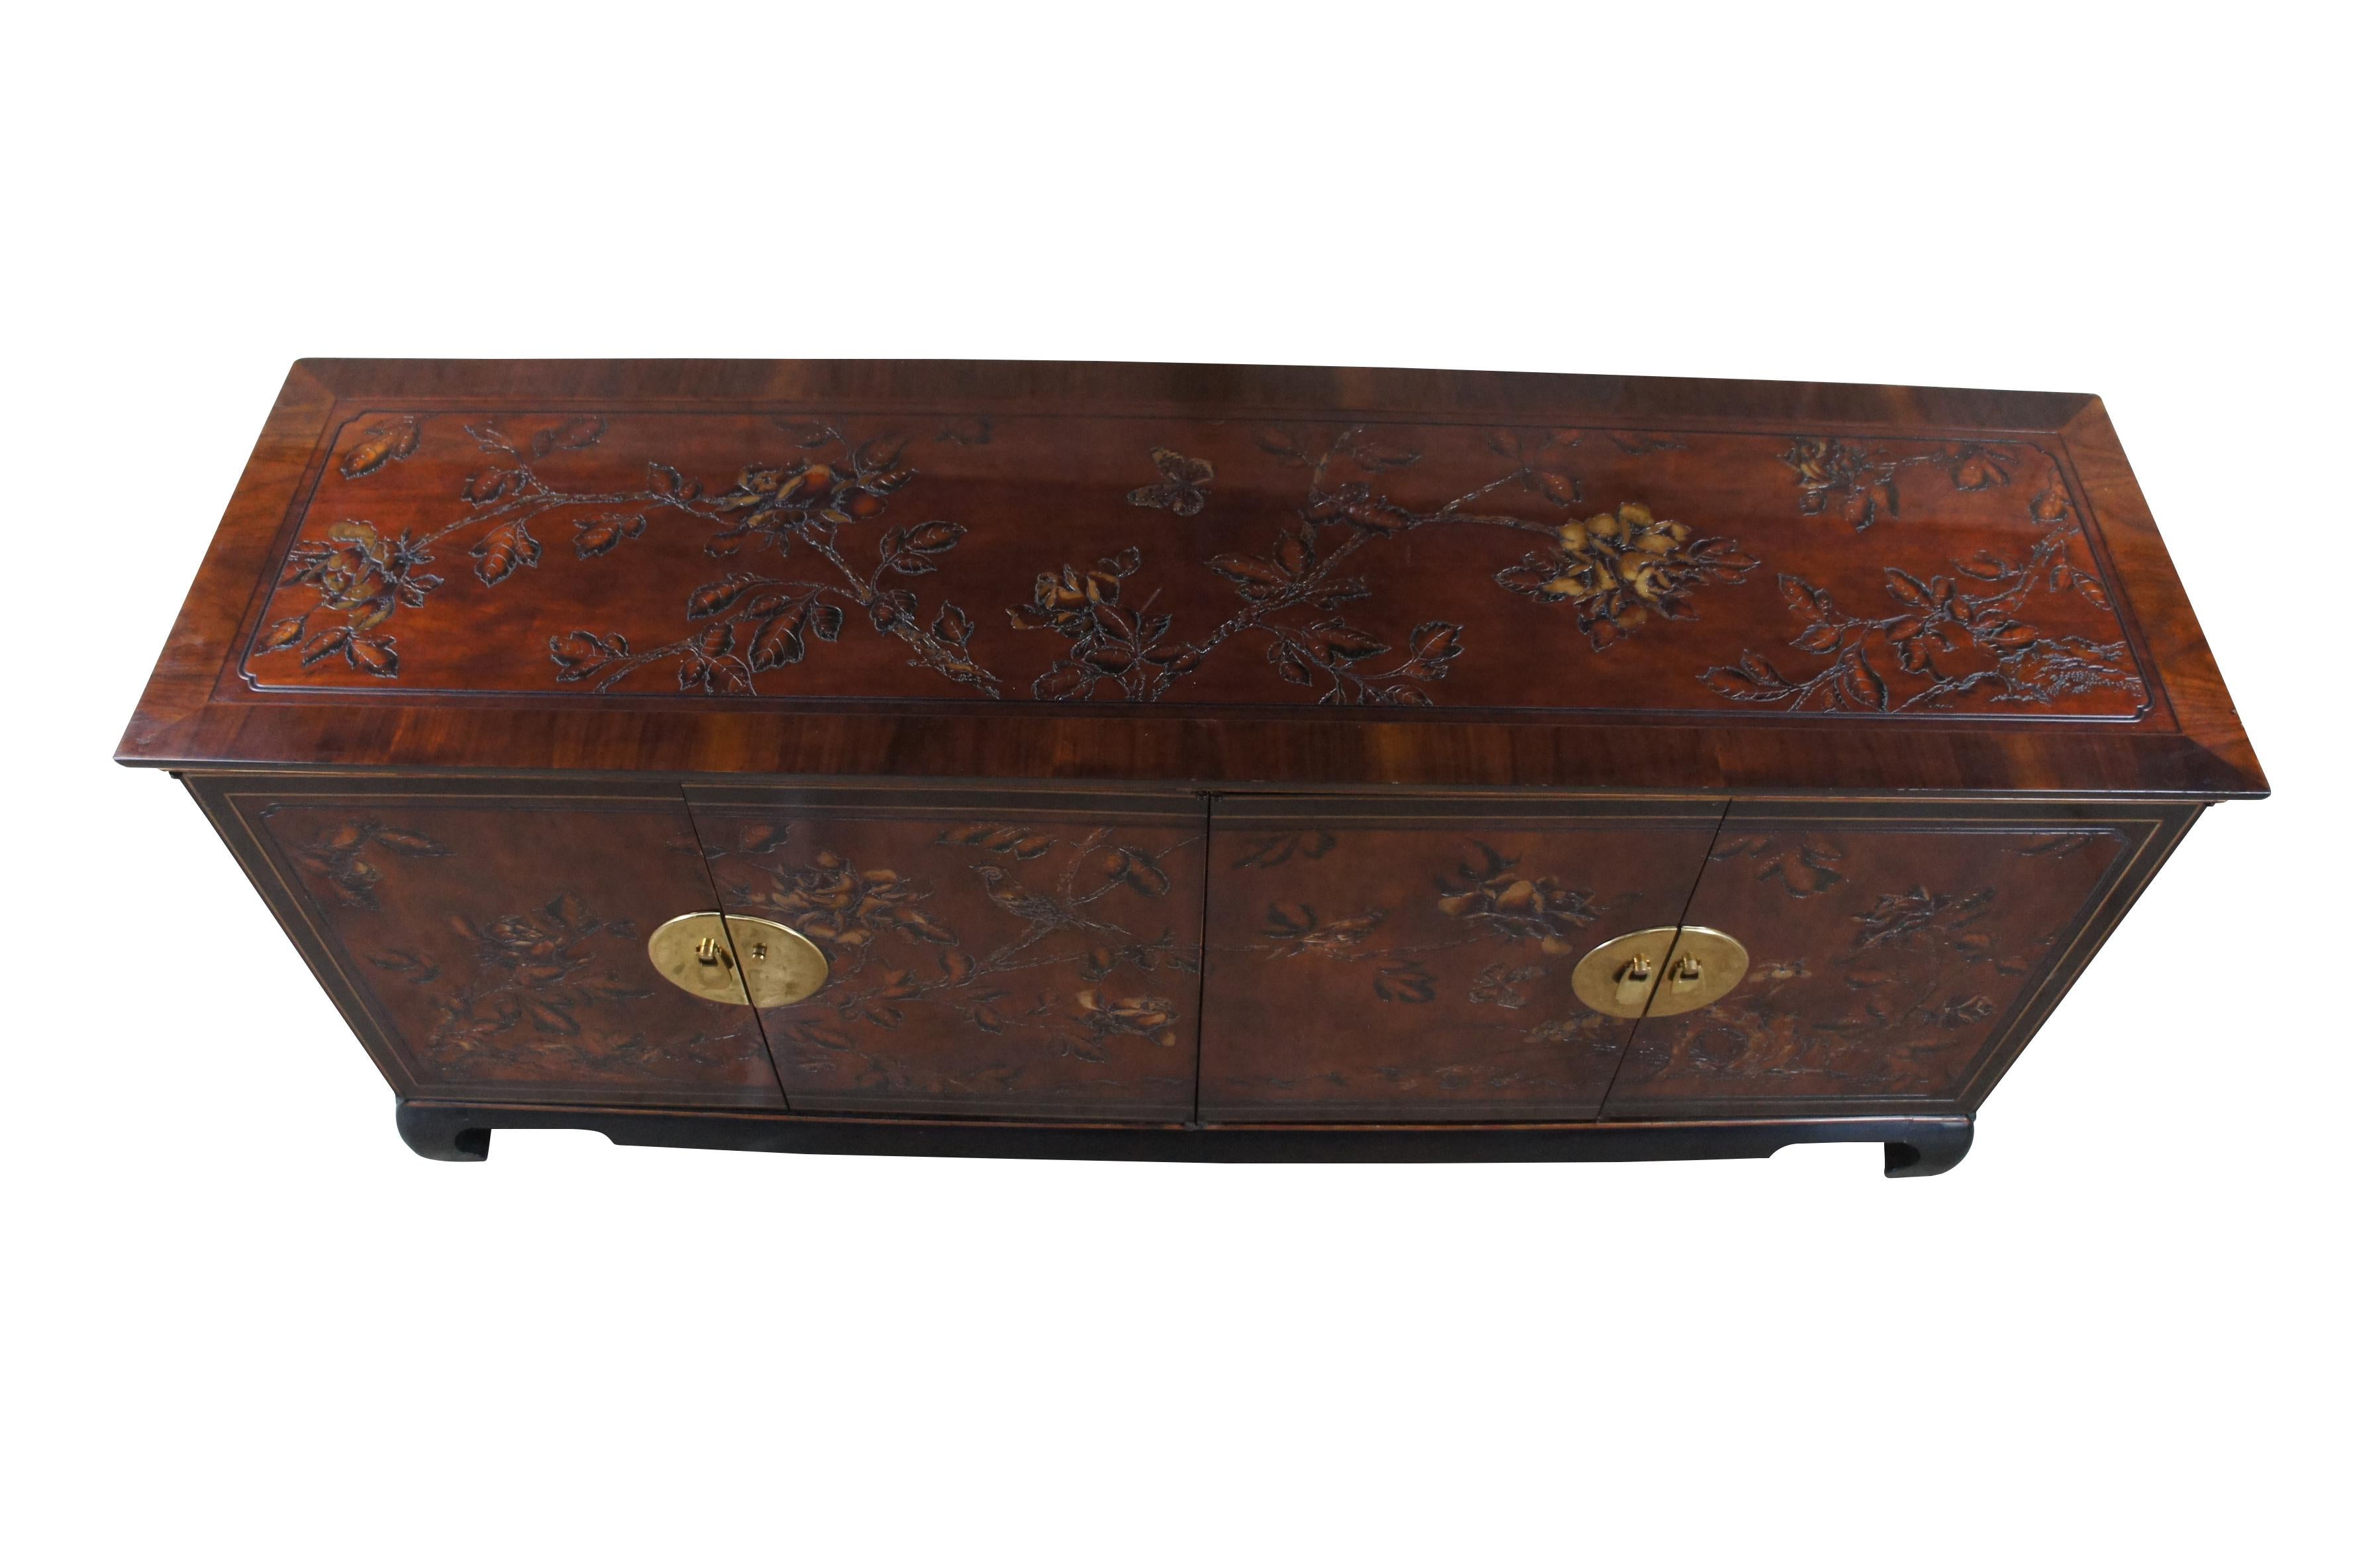 Vintage Drexel Heritage Connoisseur sideboard / buffet / credenza / console.  Made of mahogany featuring Hollywood Regency / Chinoiserie styling with embossed floral, bird and butterfly motif and brass hardware.  166-138

Dimensions:
19